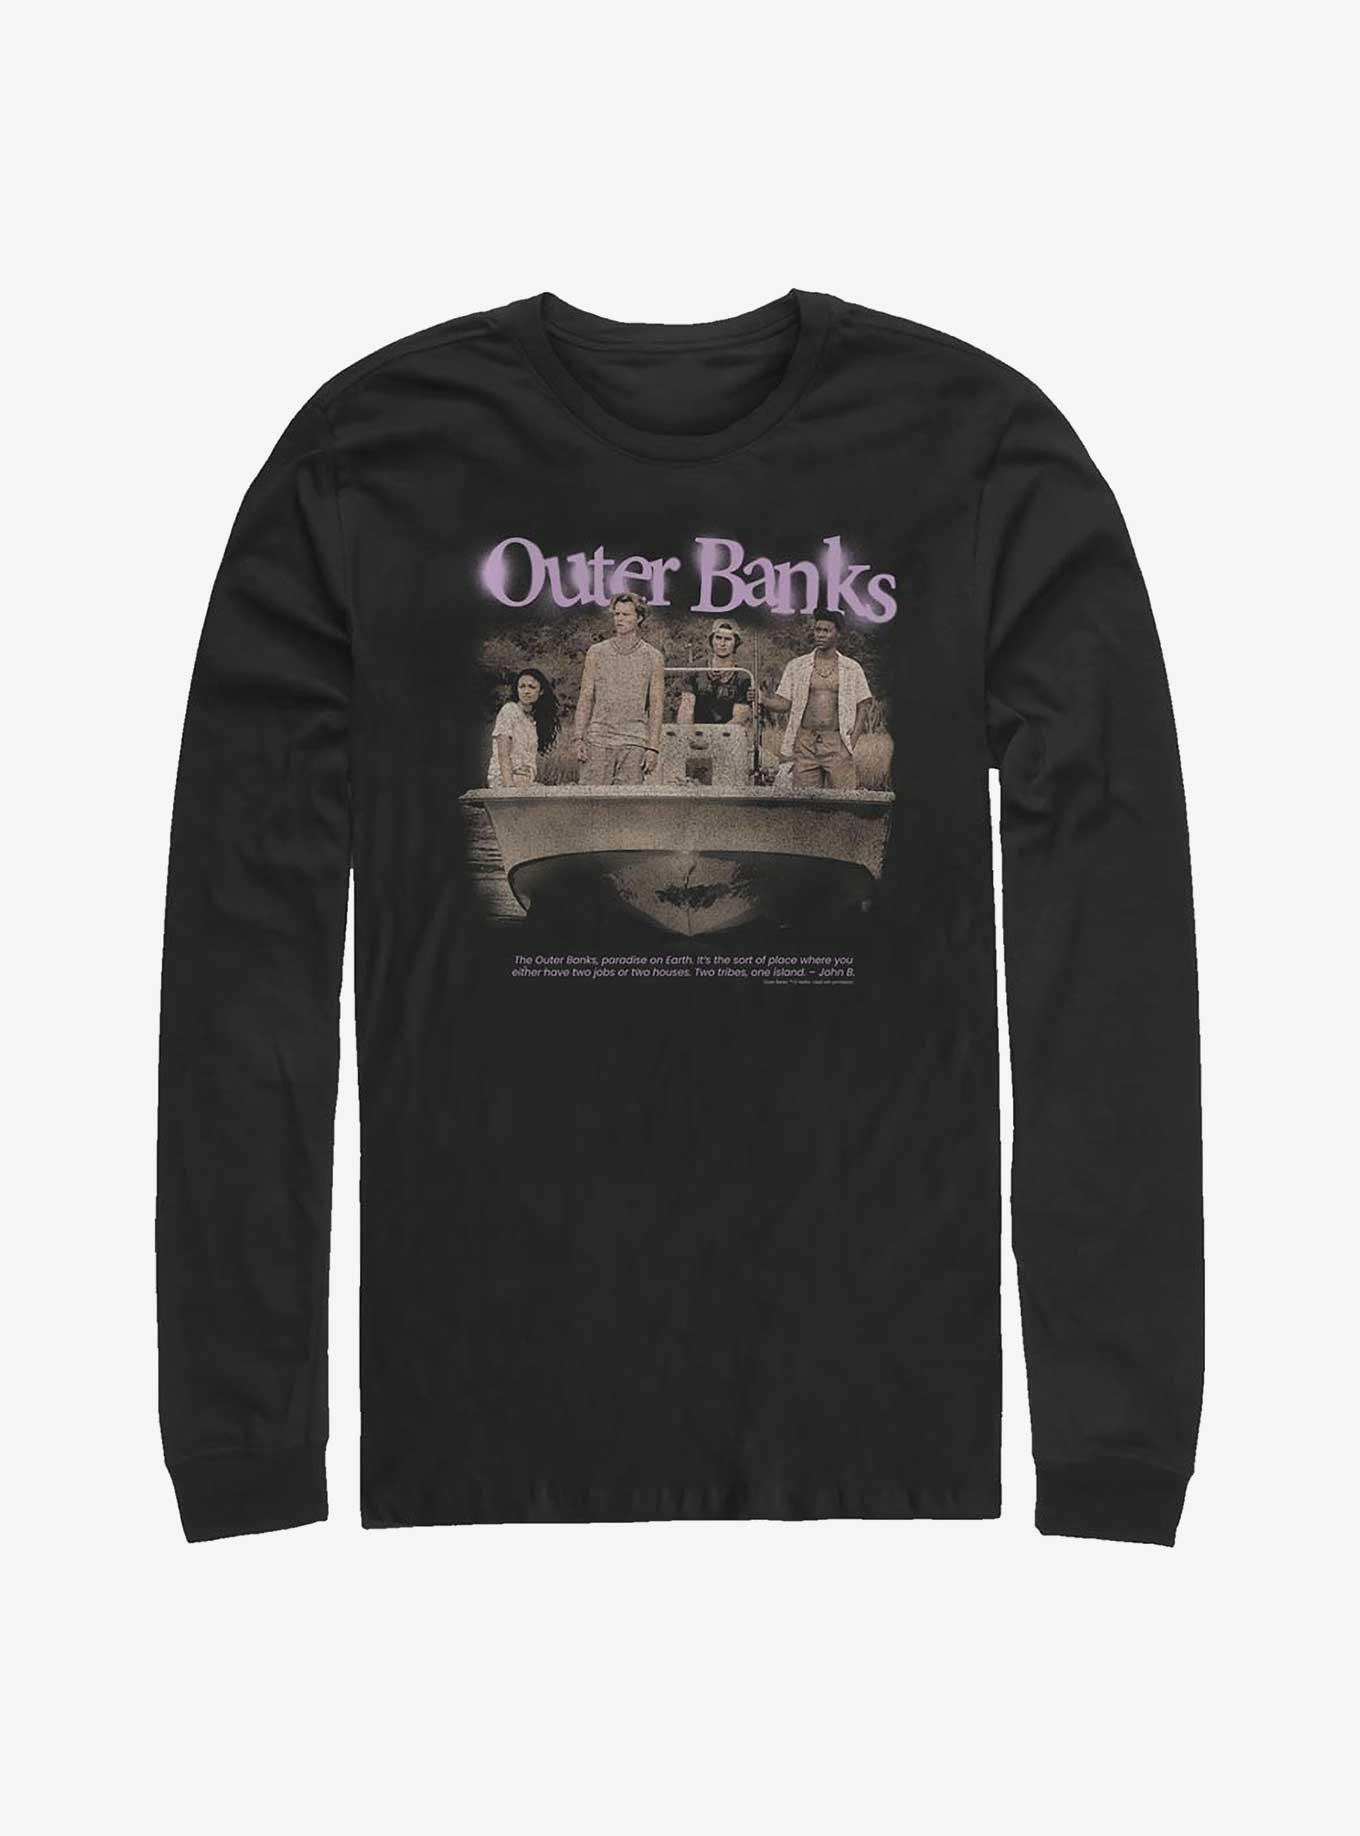 Outer Banks Spray Paint Long-Sleeve T-Shirt, BLACK, hi-res